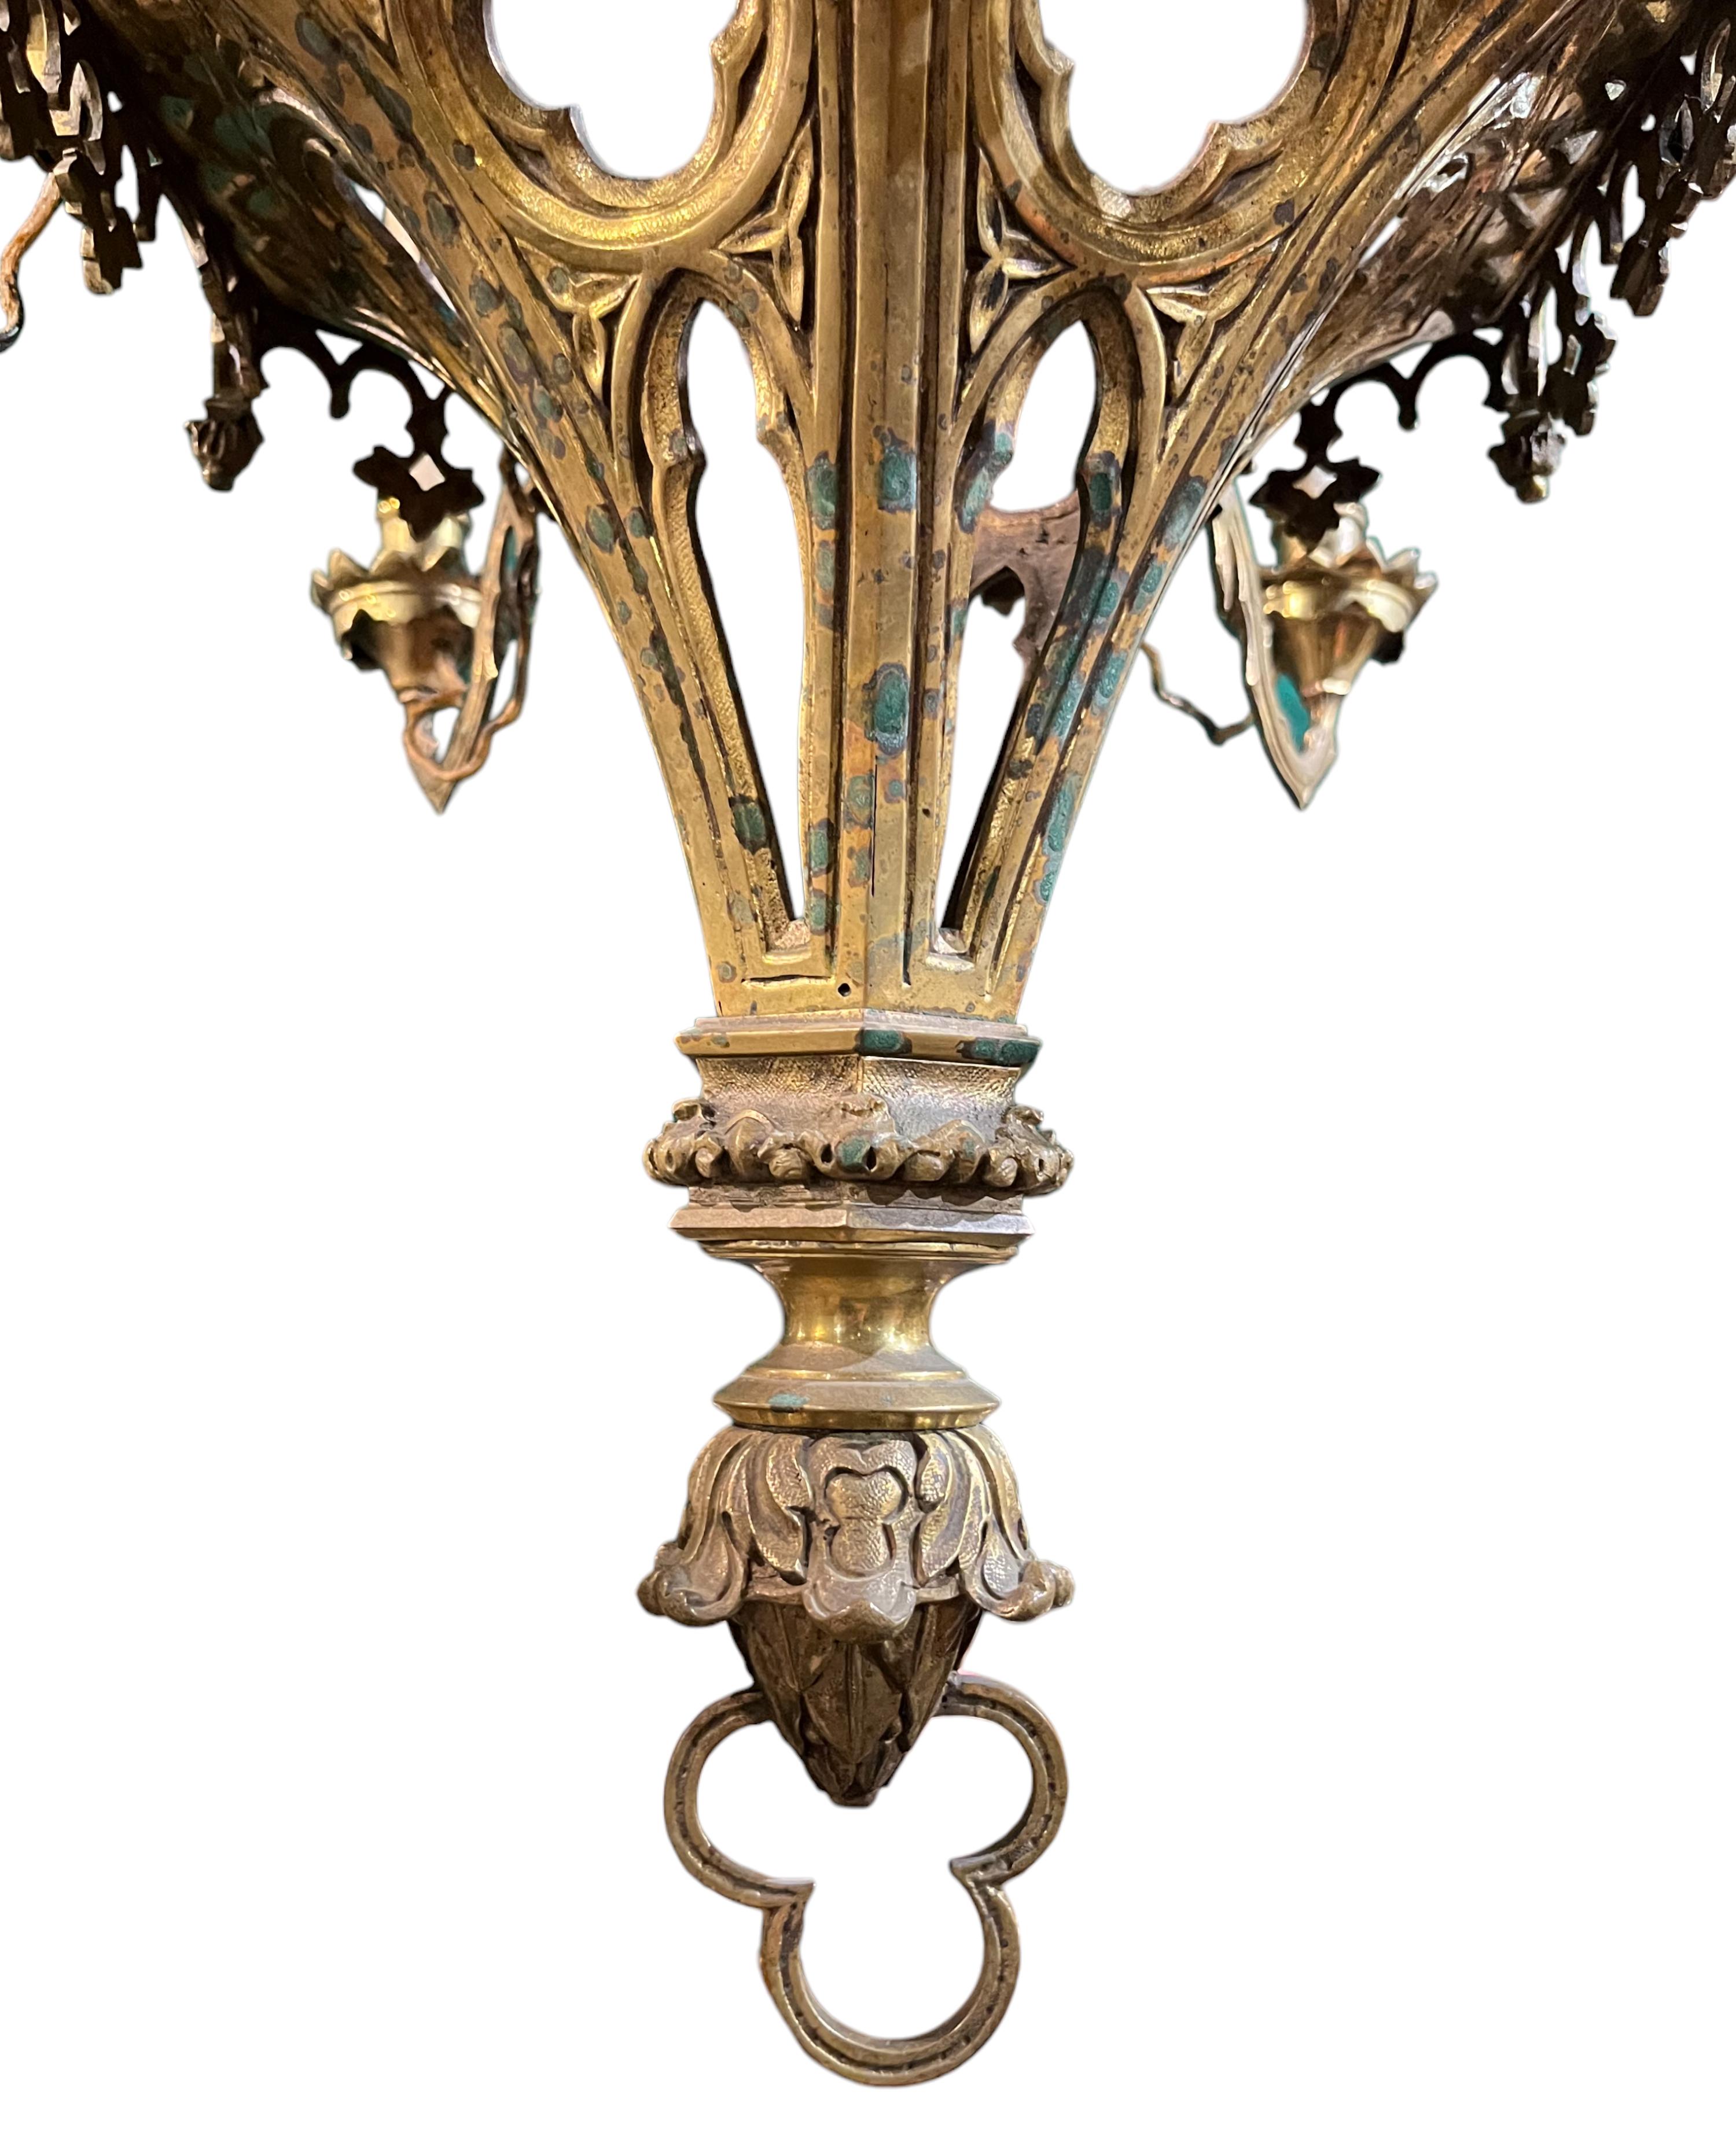 Elegant Gothic Revival Gilt Bronze Six Light Chandelier In Fair Condition For Sale In New York, NY